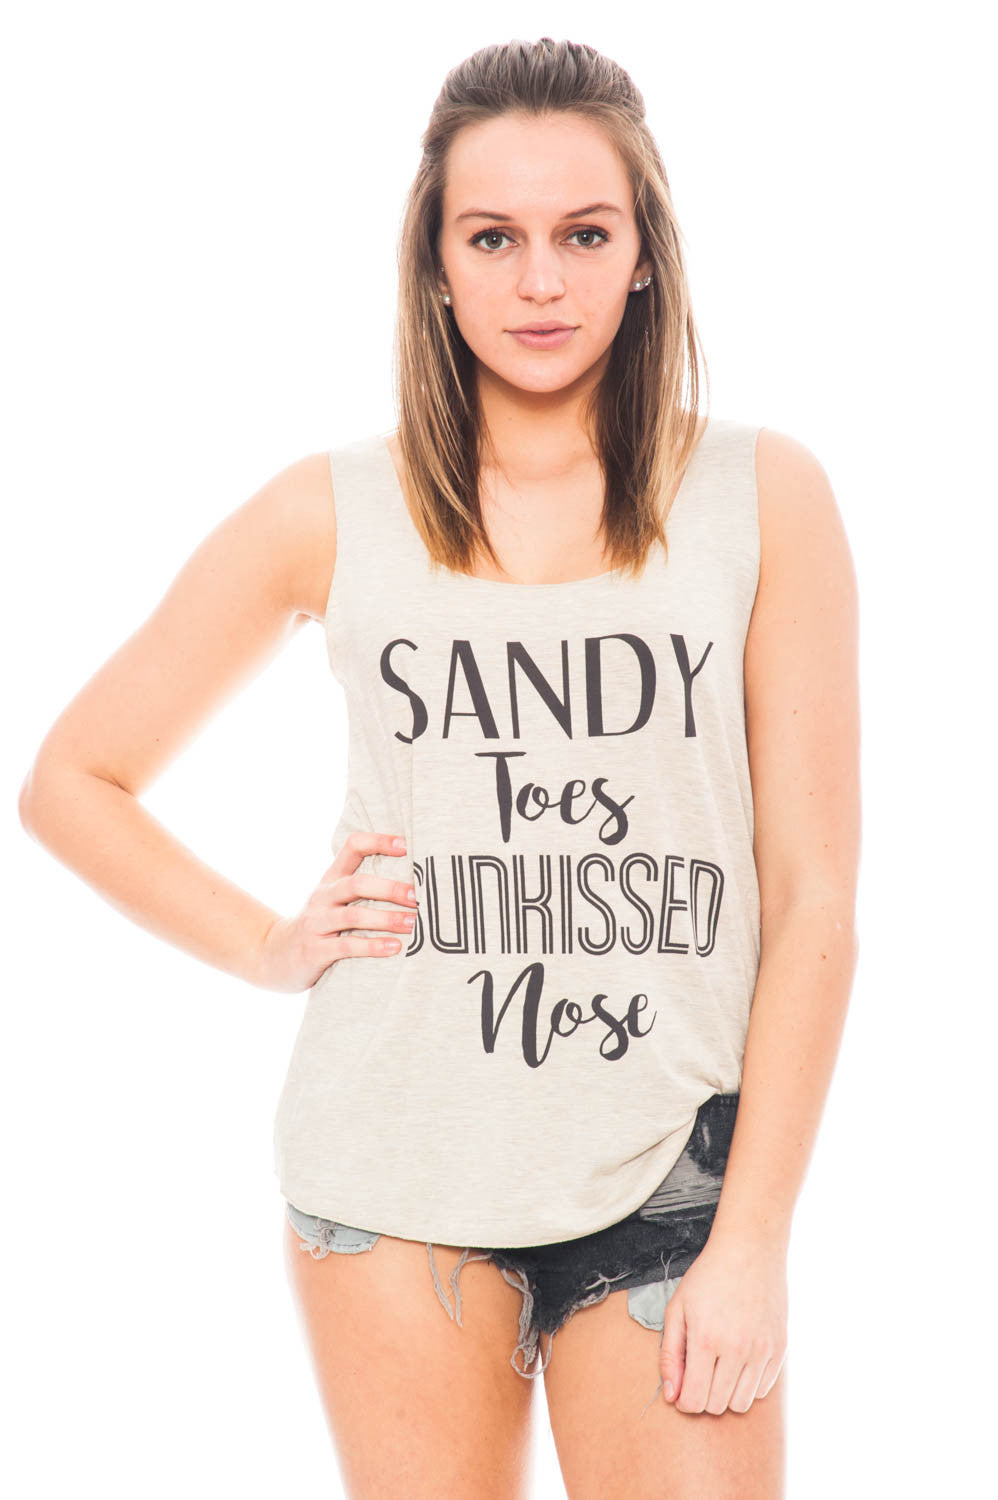 Tee - Sandy Toes Sunkissed Nose Top